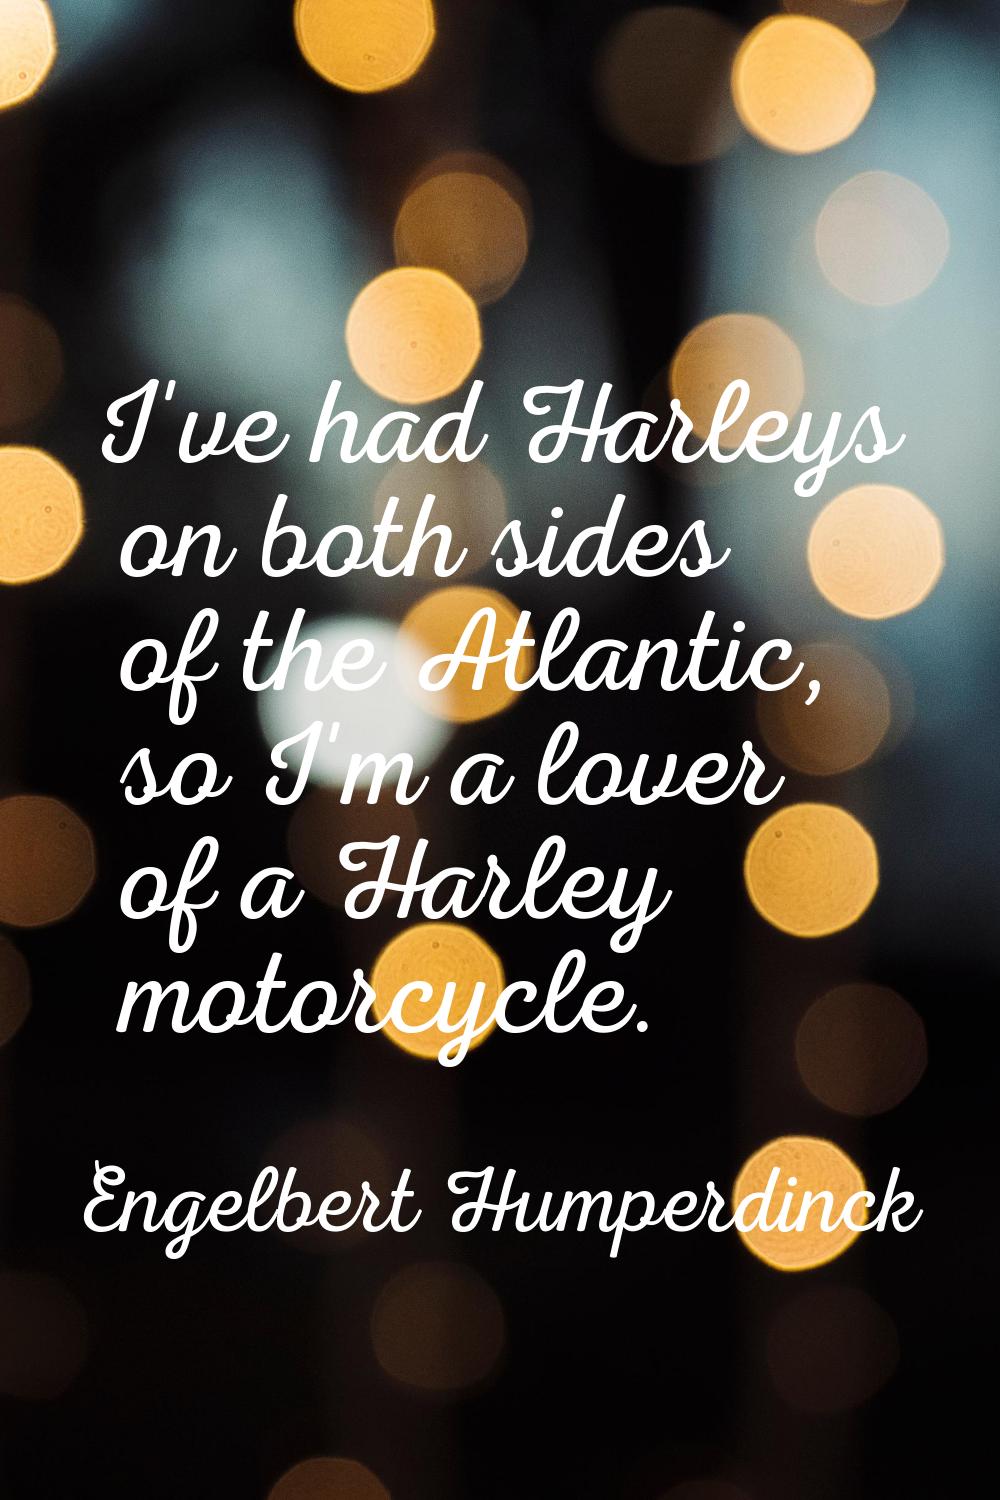 I've had Harleys on both sides of the Atlantic, so I'm a lover of a Harley motorcycle.